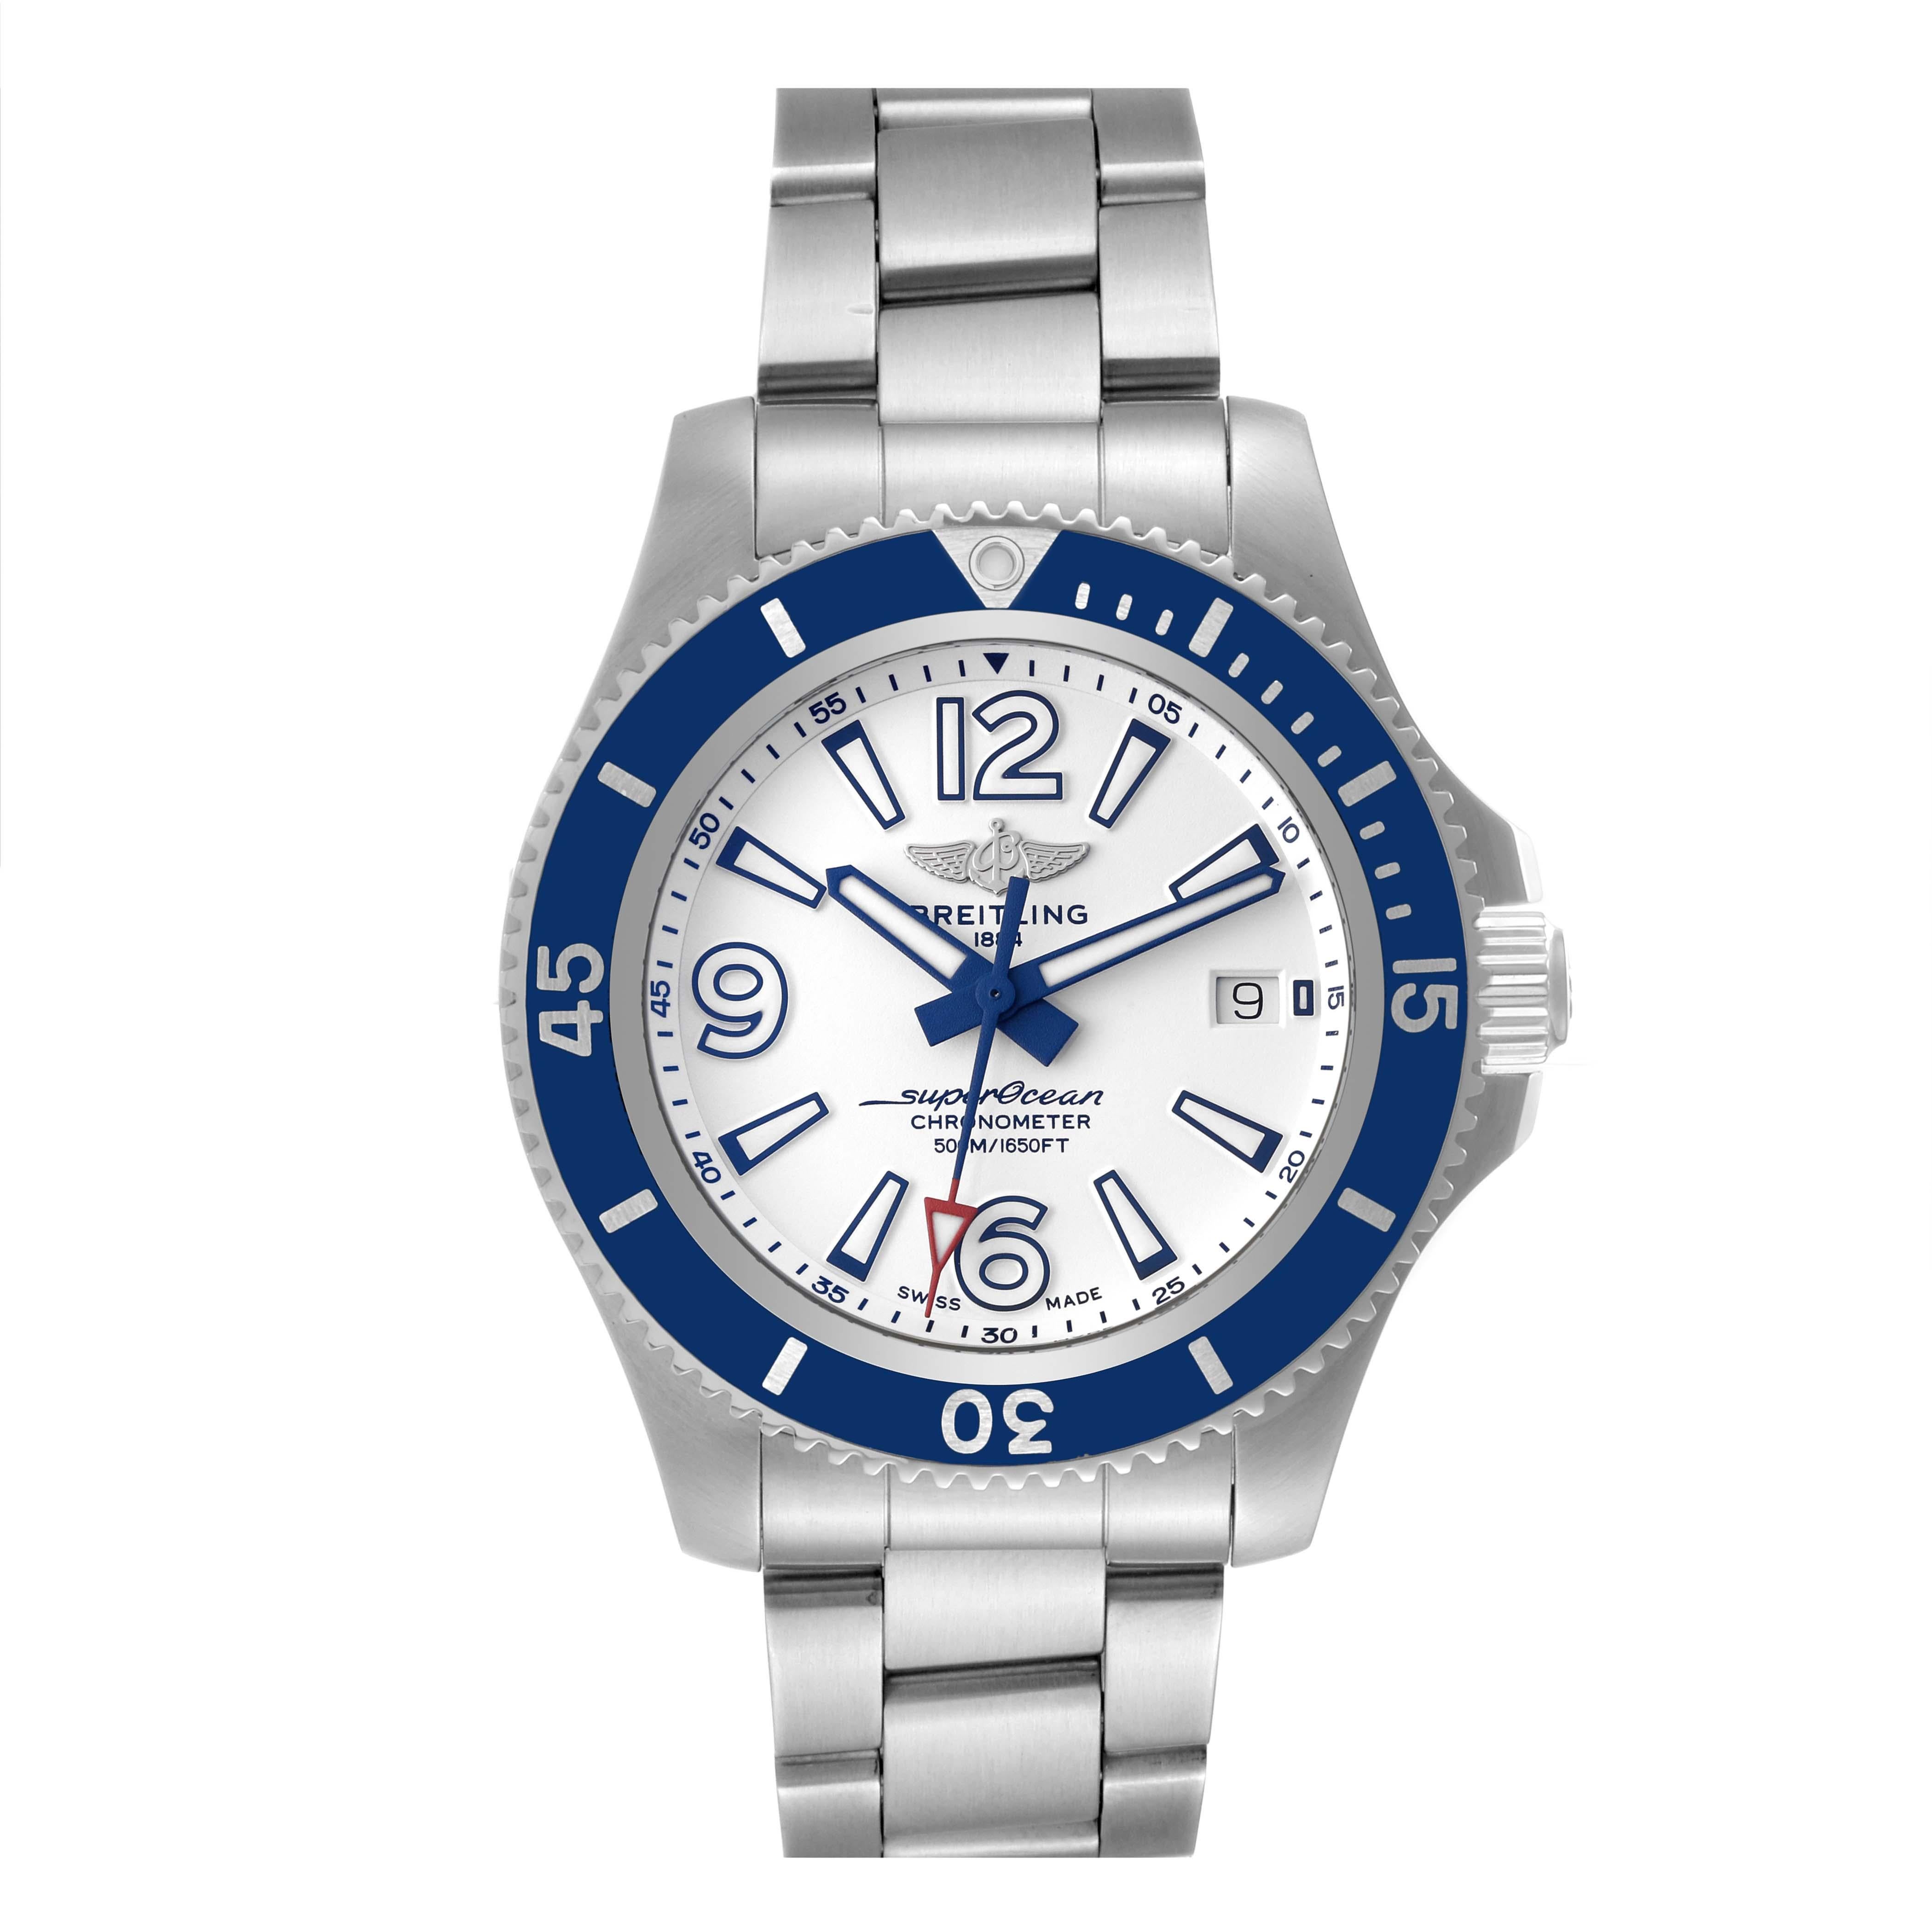 Breitling Superocean 42 White Dial Steel Mens Watch A17366 Box Card. Automatic self-winding movement. Stainless steel case 42.0 mm in diameter. Stainless steel screwed-down crown. Blue stainless steel unidirectional revolving bezel. 0-60